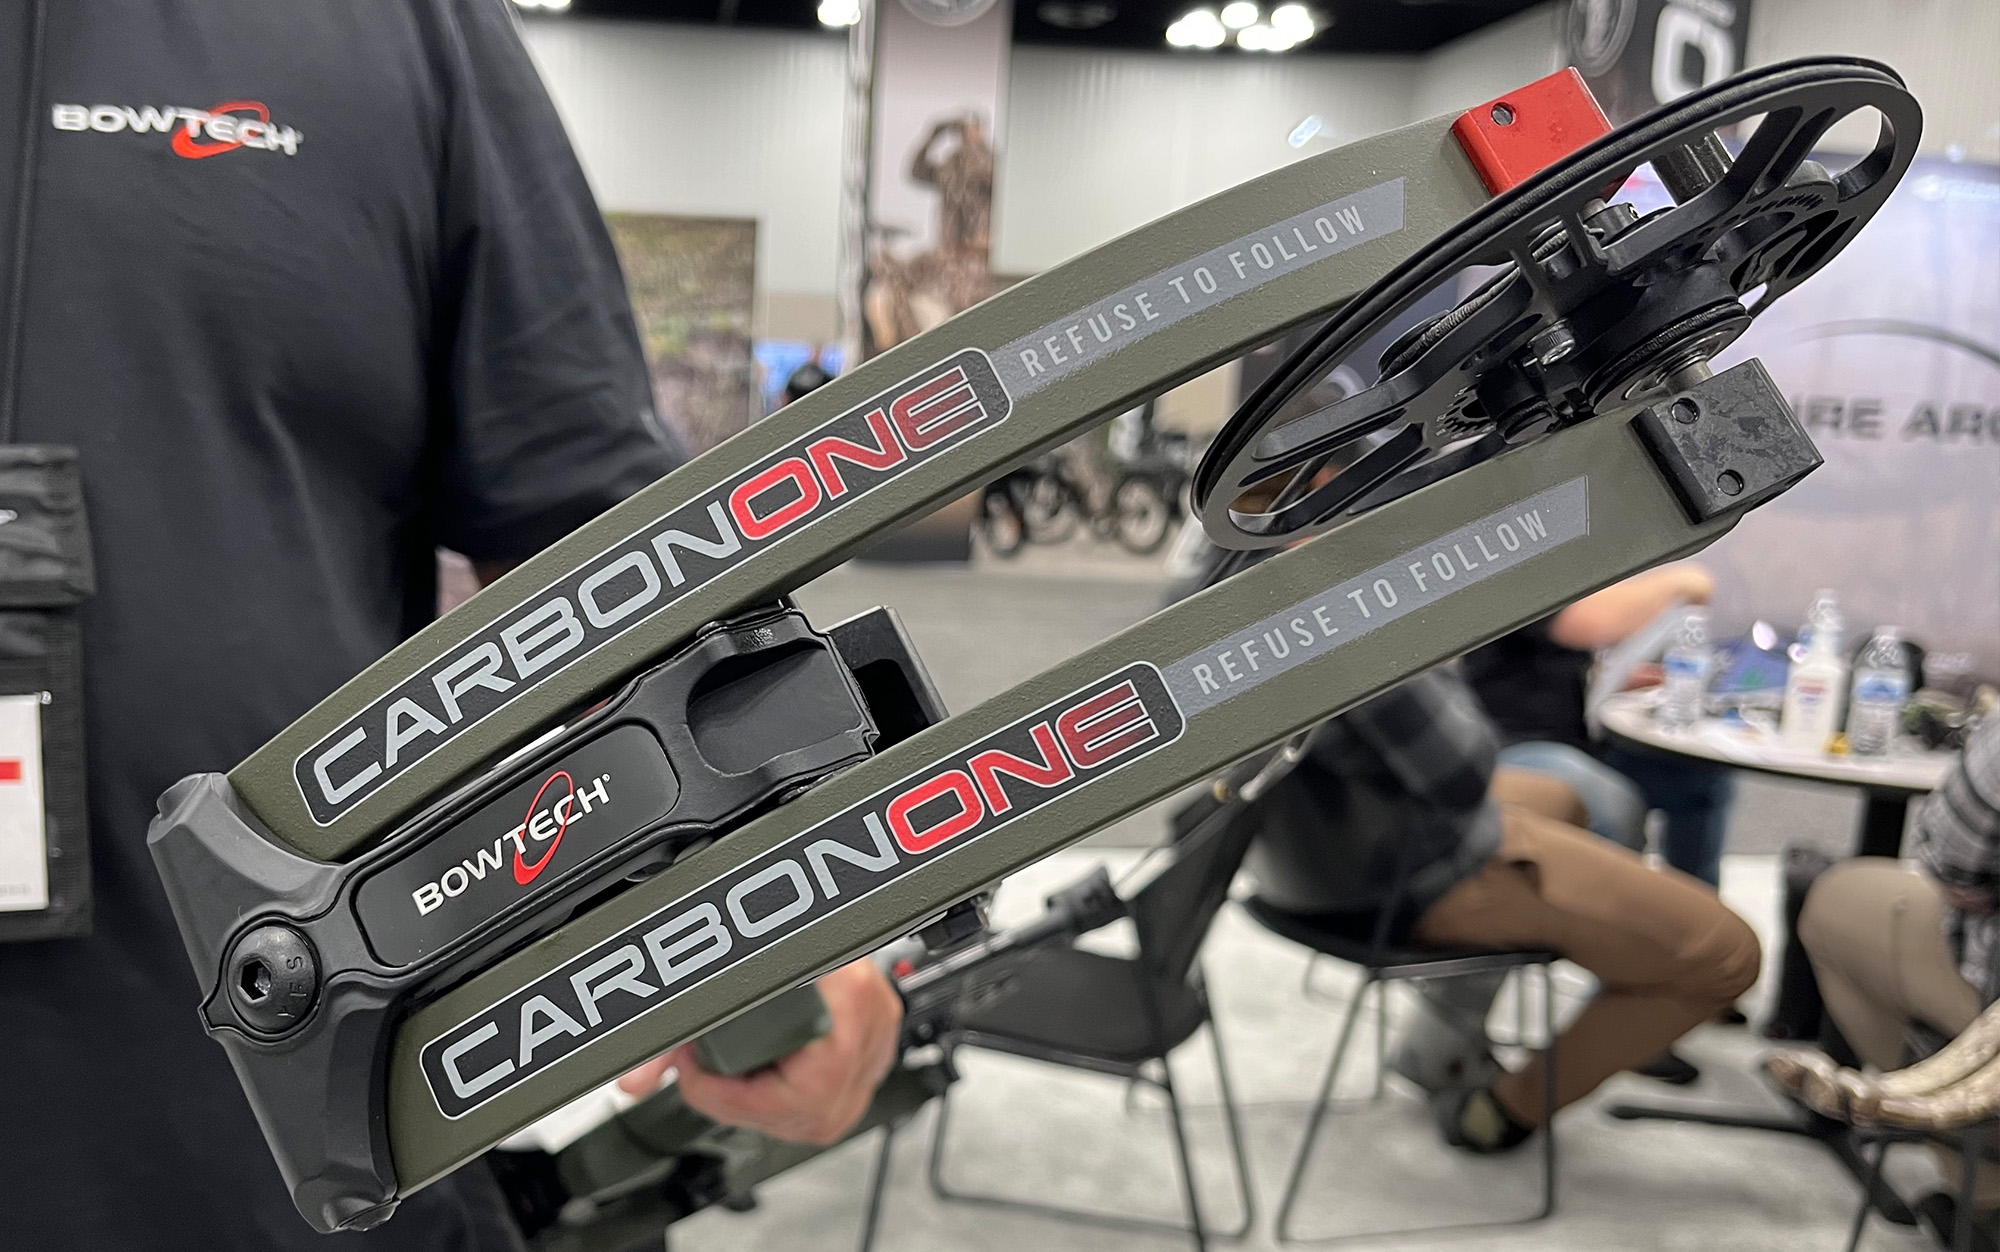 The BowTech Carbon One is new from ATA 2023.